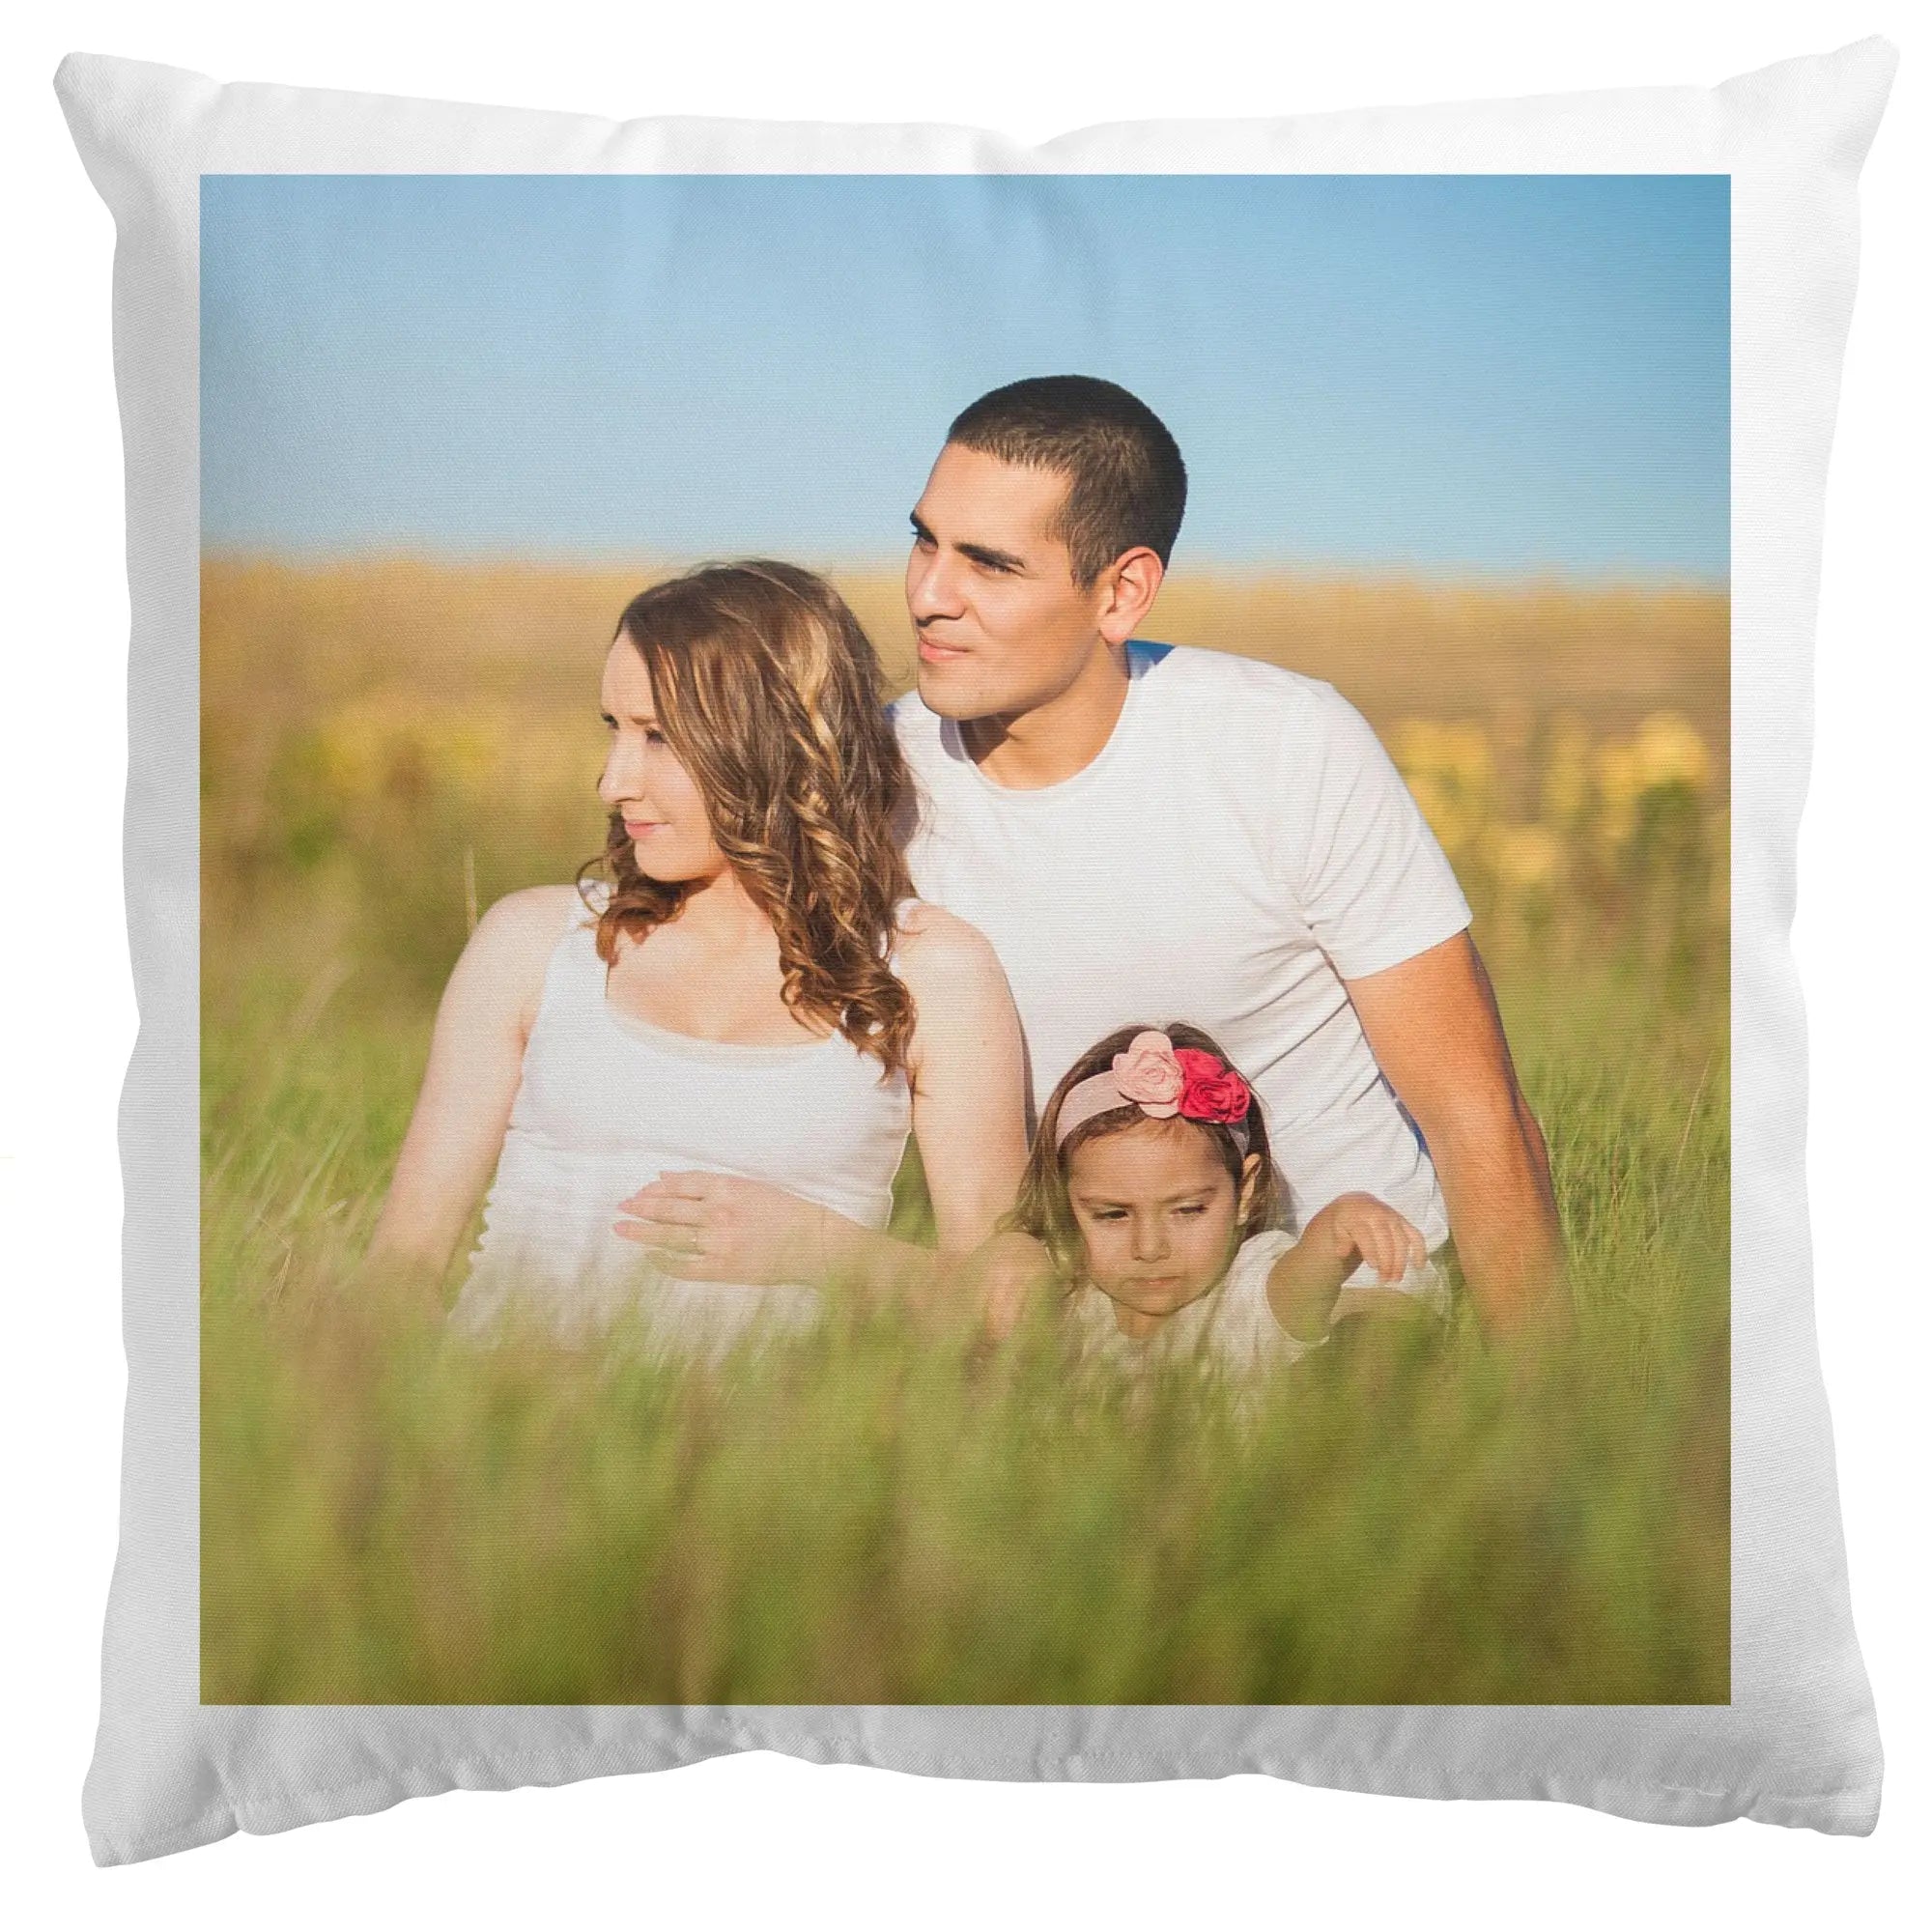 Personalised Cushion 1 Image Perfect Gift Décor - Fathers Day Gift - CushionPop